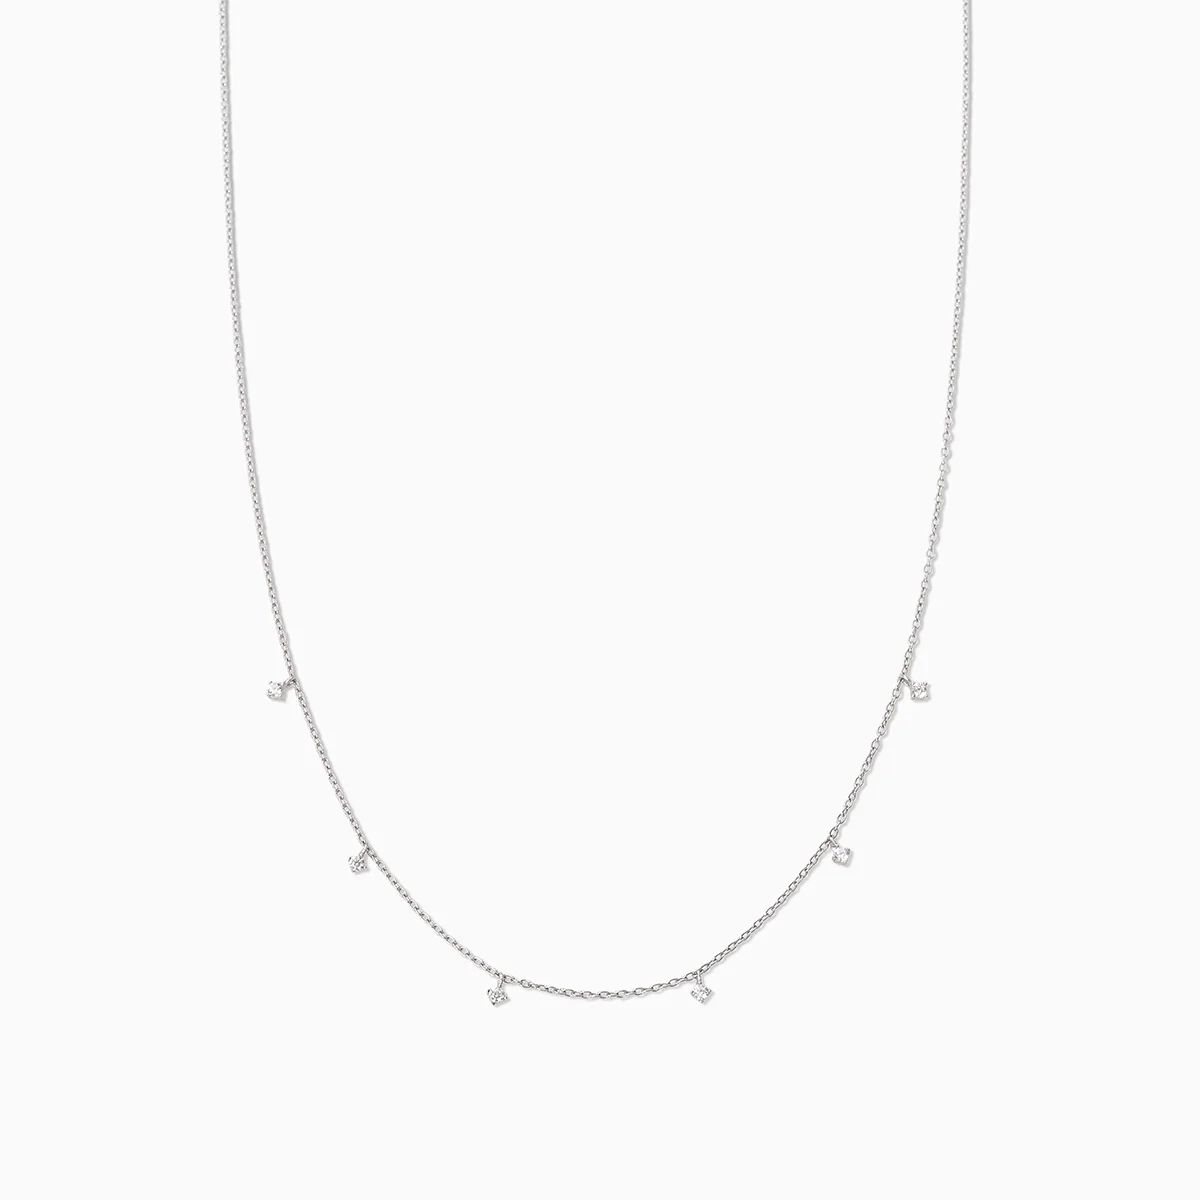 Shooting Star Necklace | Uncommon James